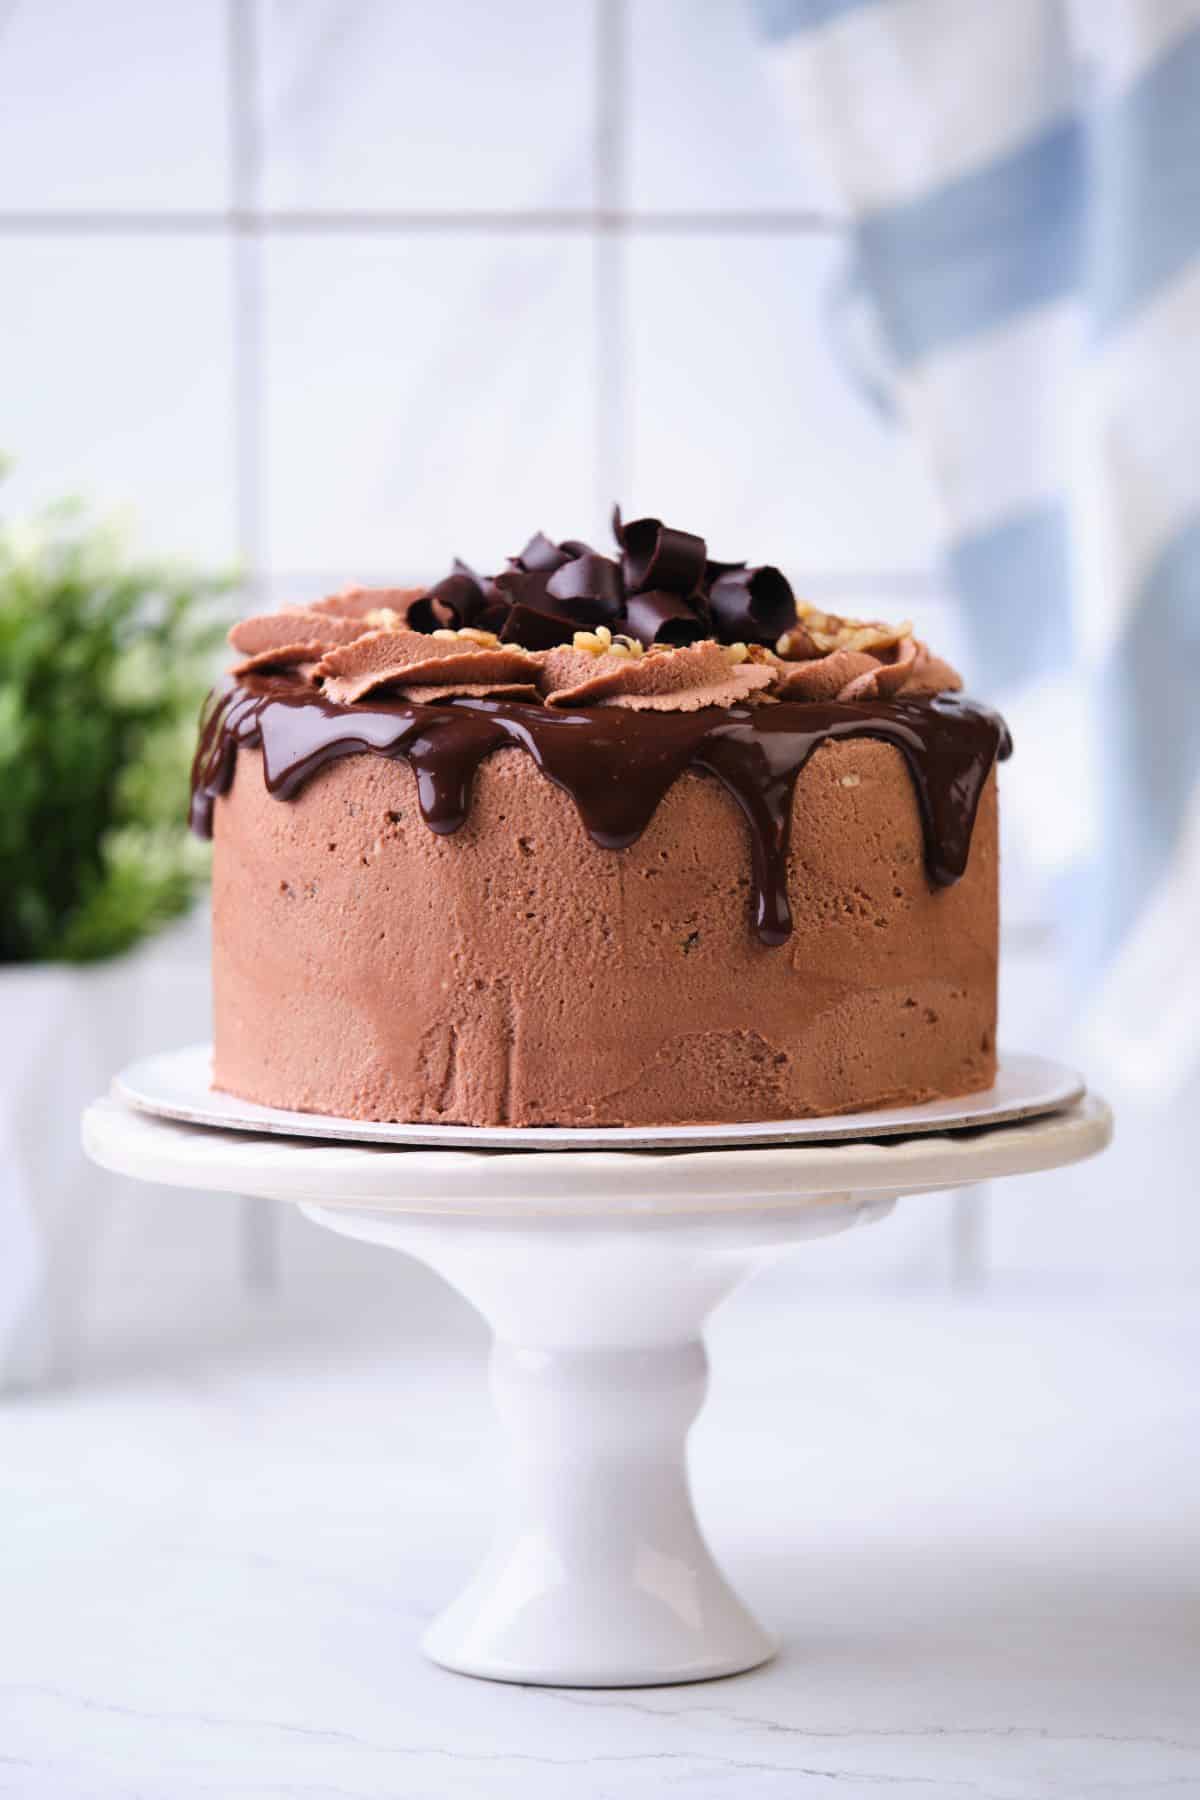 A chocolate cake on a cake stand decorated with chocolate drip and walnuts and chocolate curls.